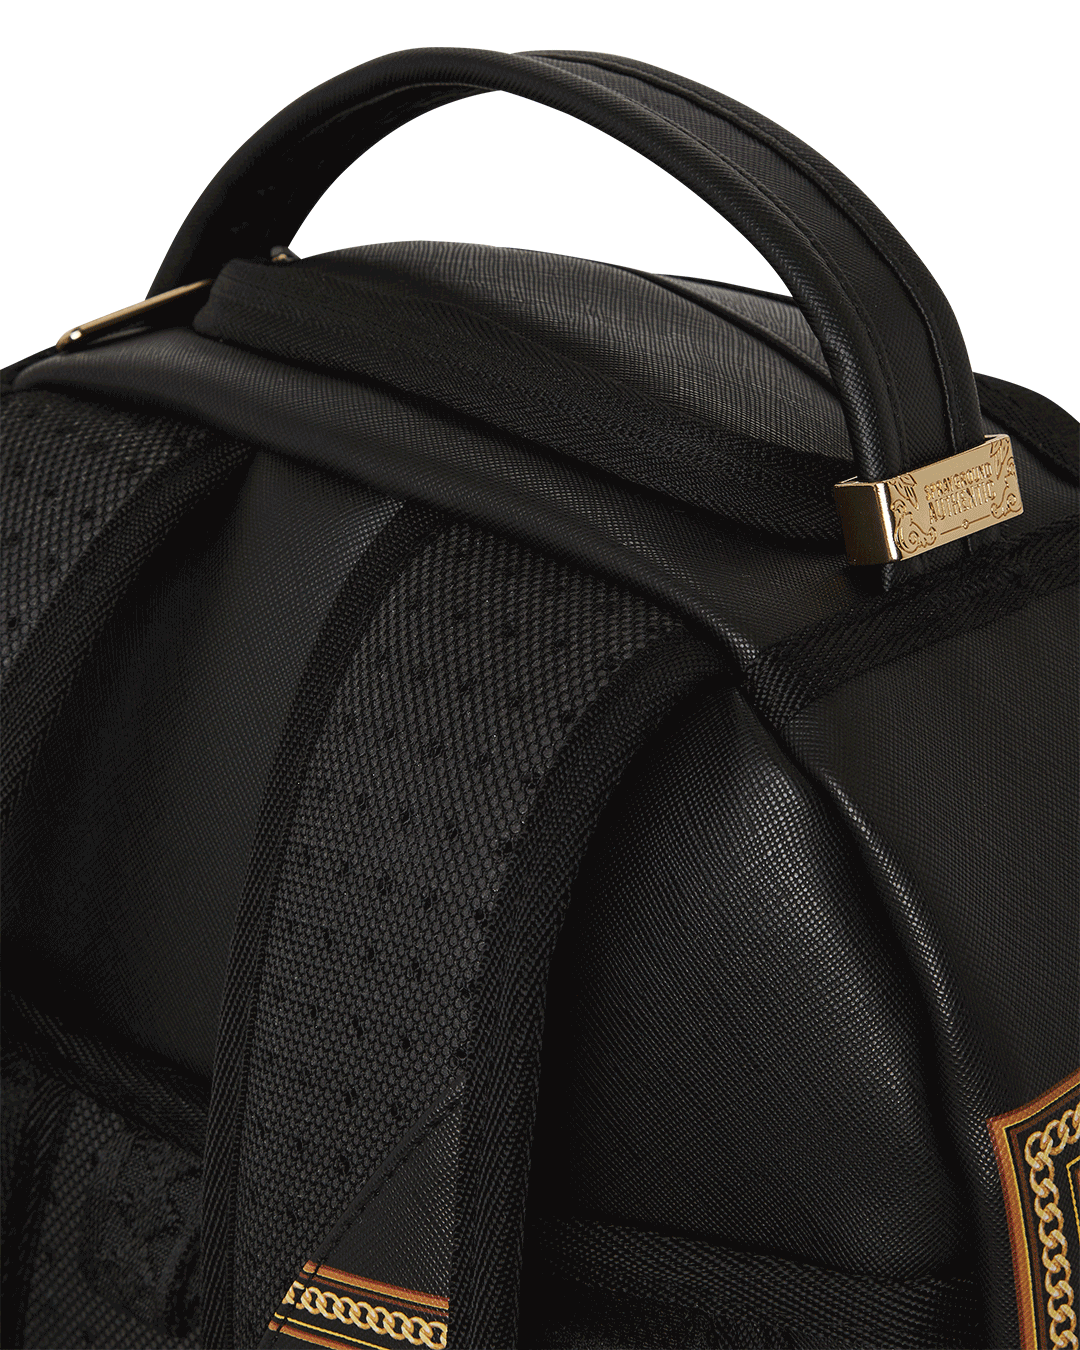 SCARFACE GOLDEN STAIRS DLXSV BACKPACK